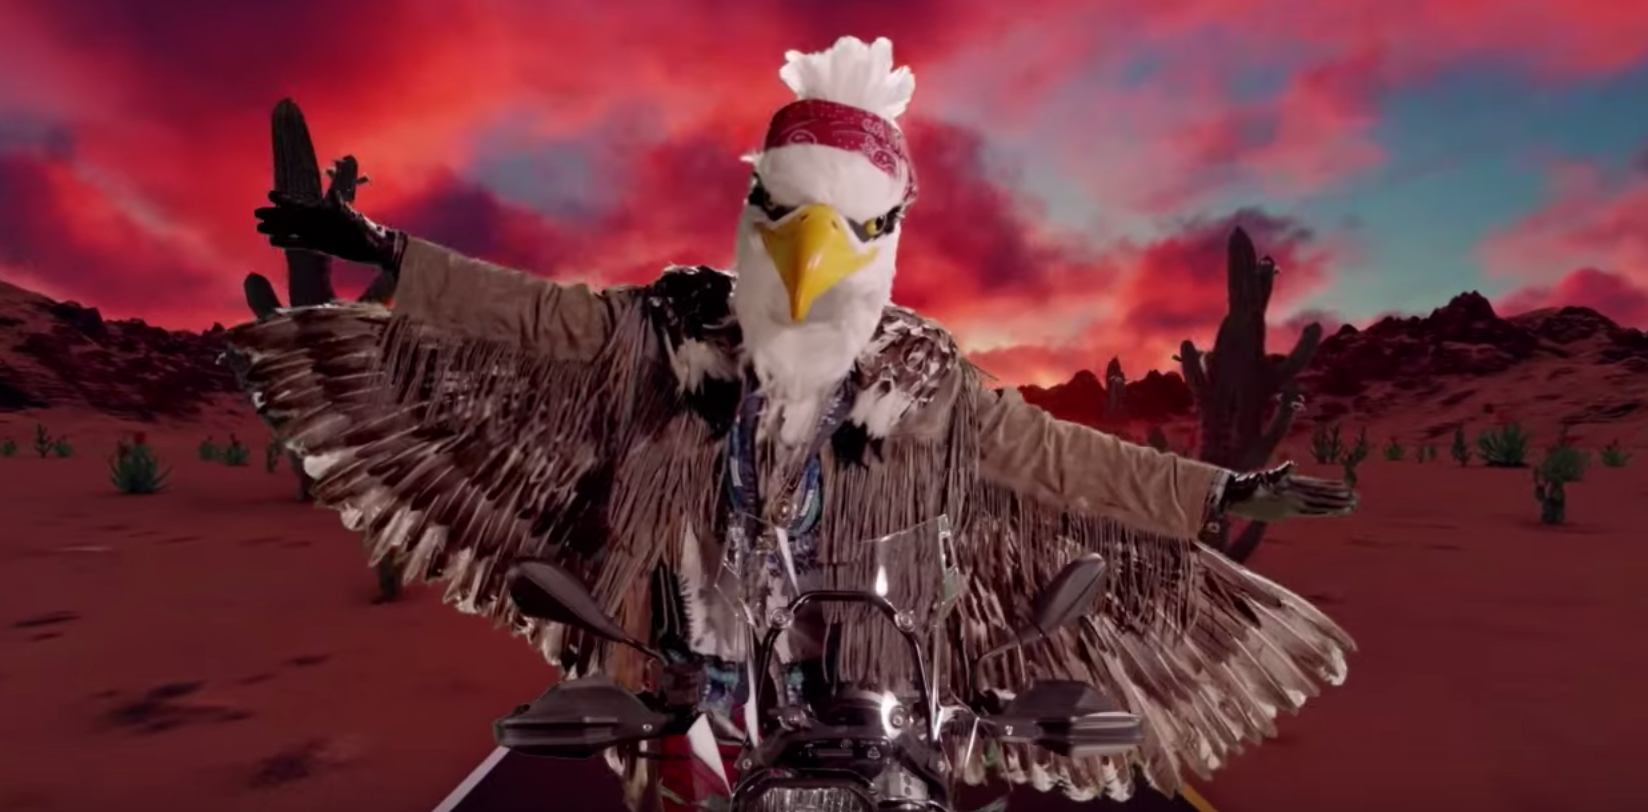 Who Is the Eagle in 'The Masked Singer' Season 2? Clues Point to This